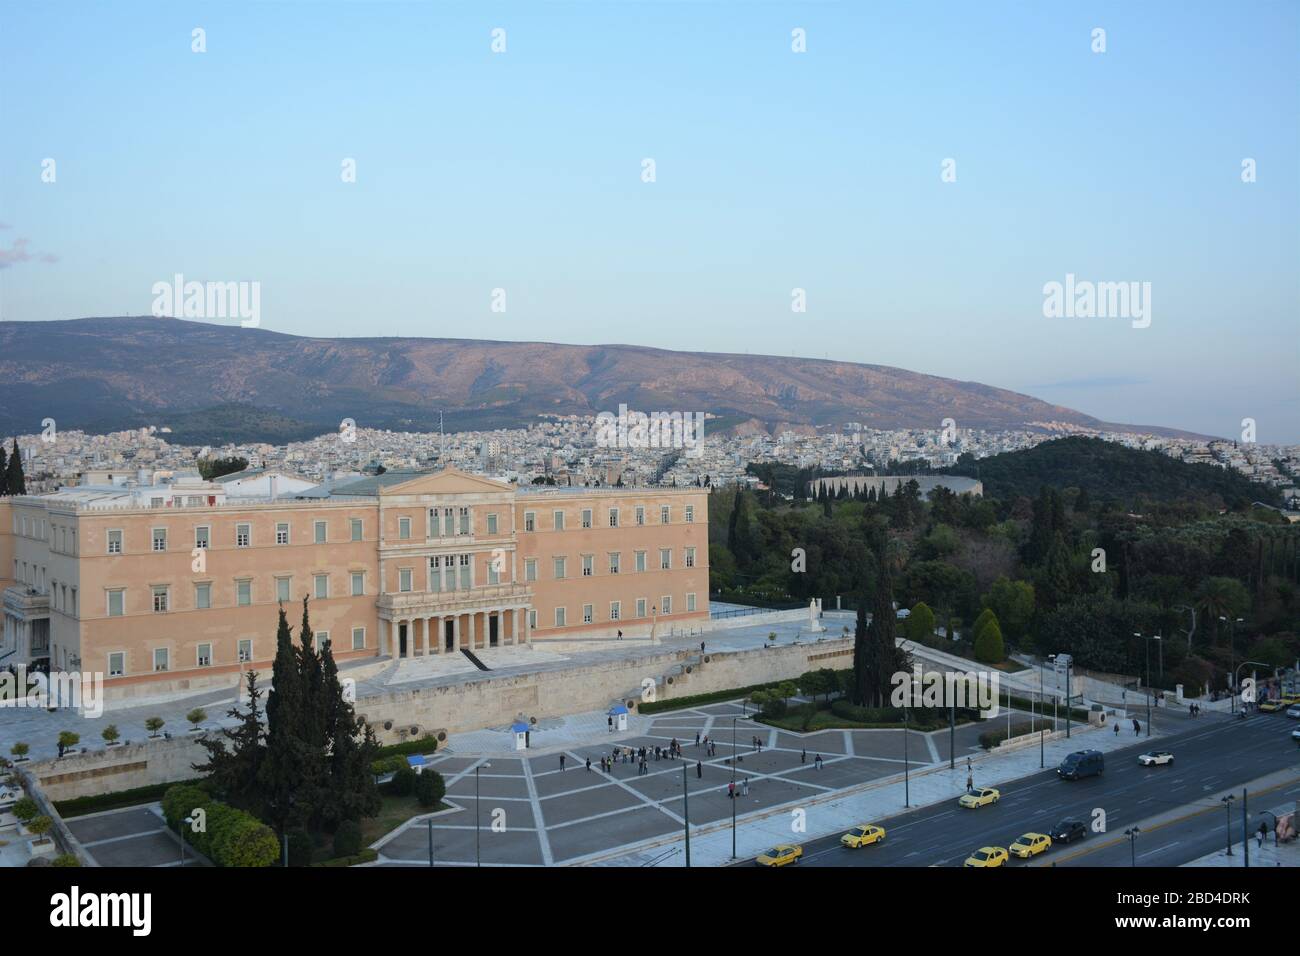 View onto the Greek Parliament building (old Royal Palace) in Syntagma Square from the rooftop of the Hotel Grande Bretagne, Athens, Greece. Stock Photo